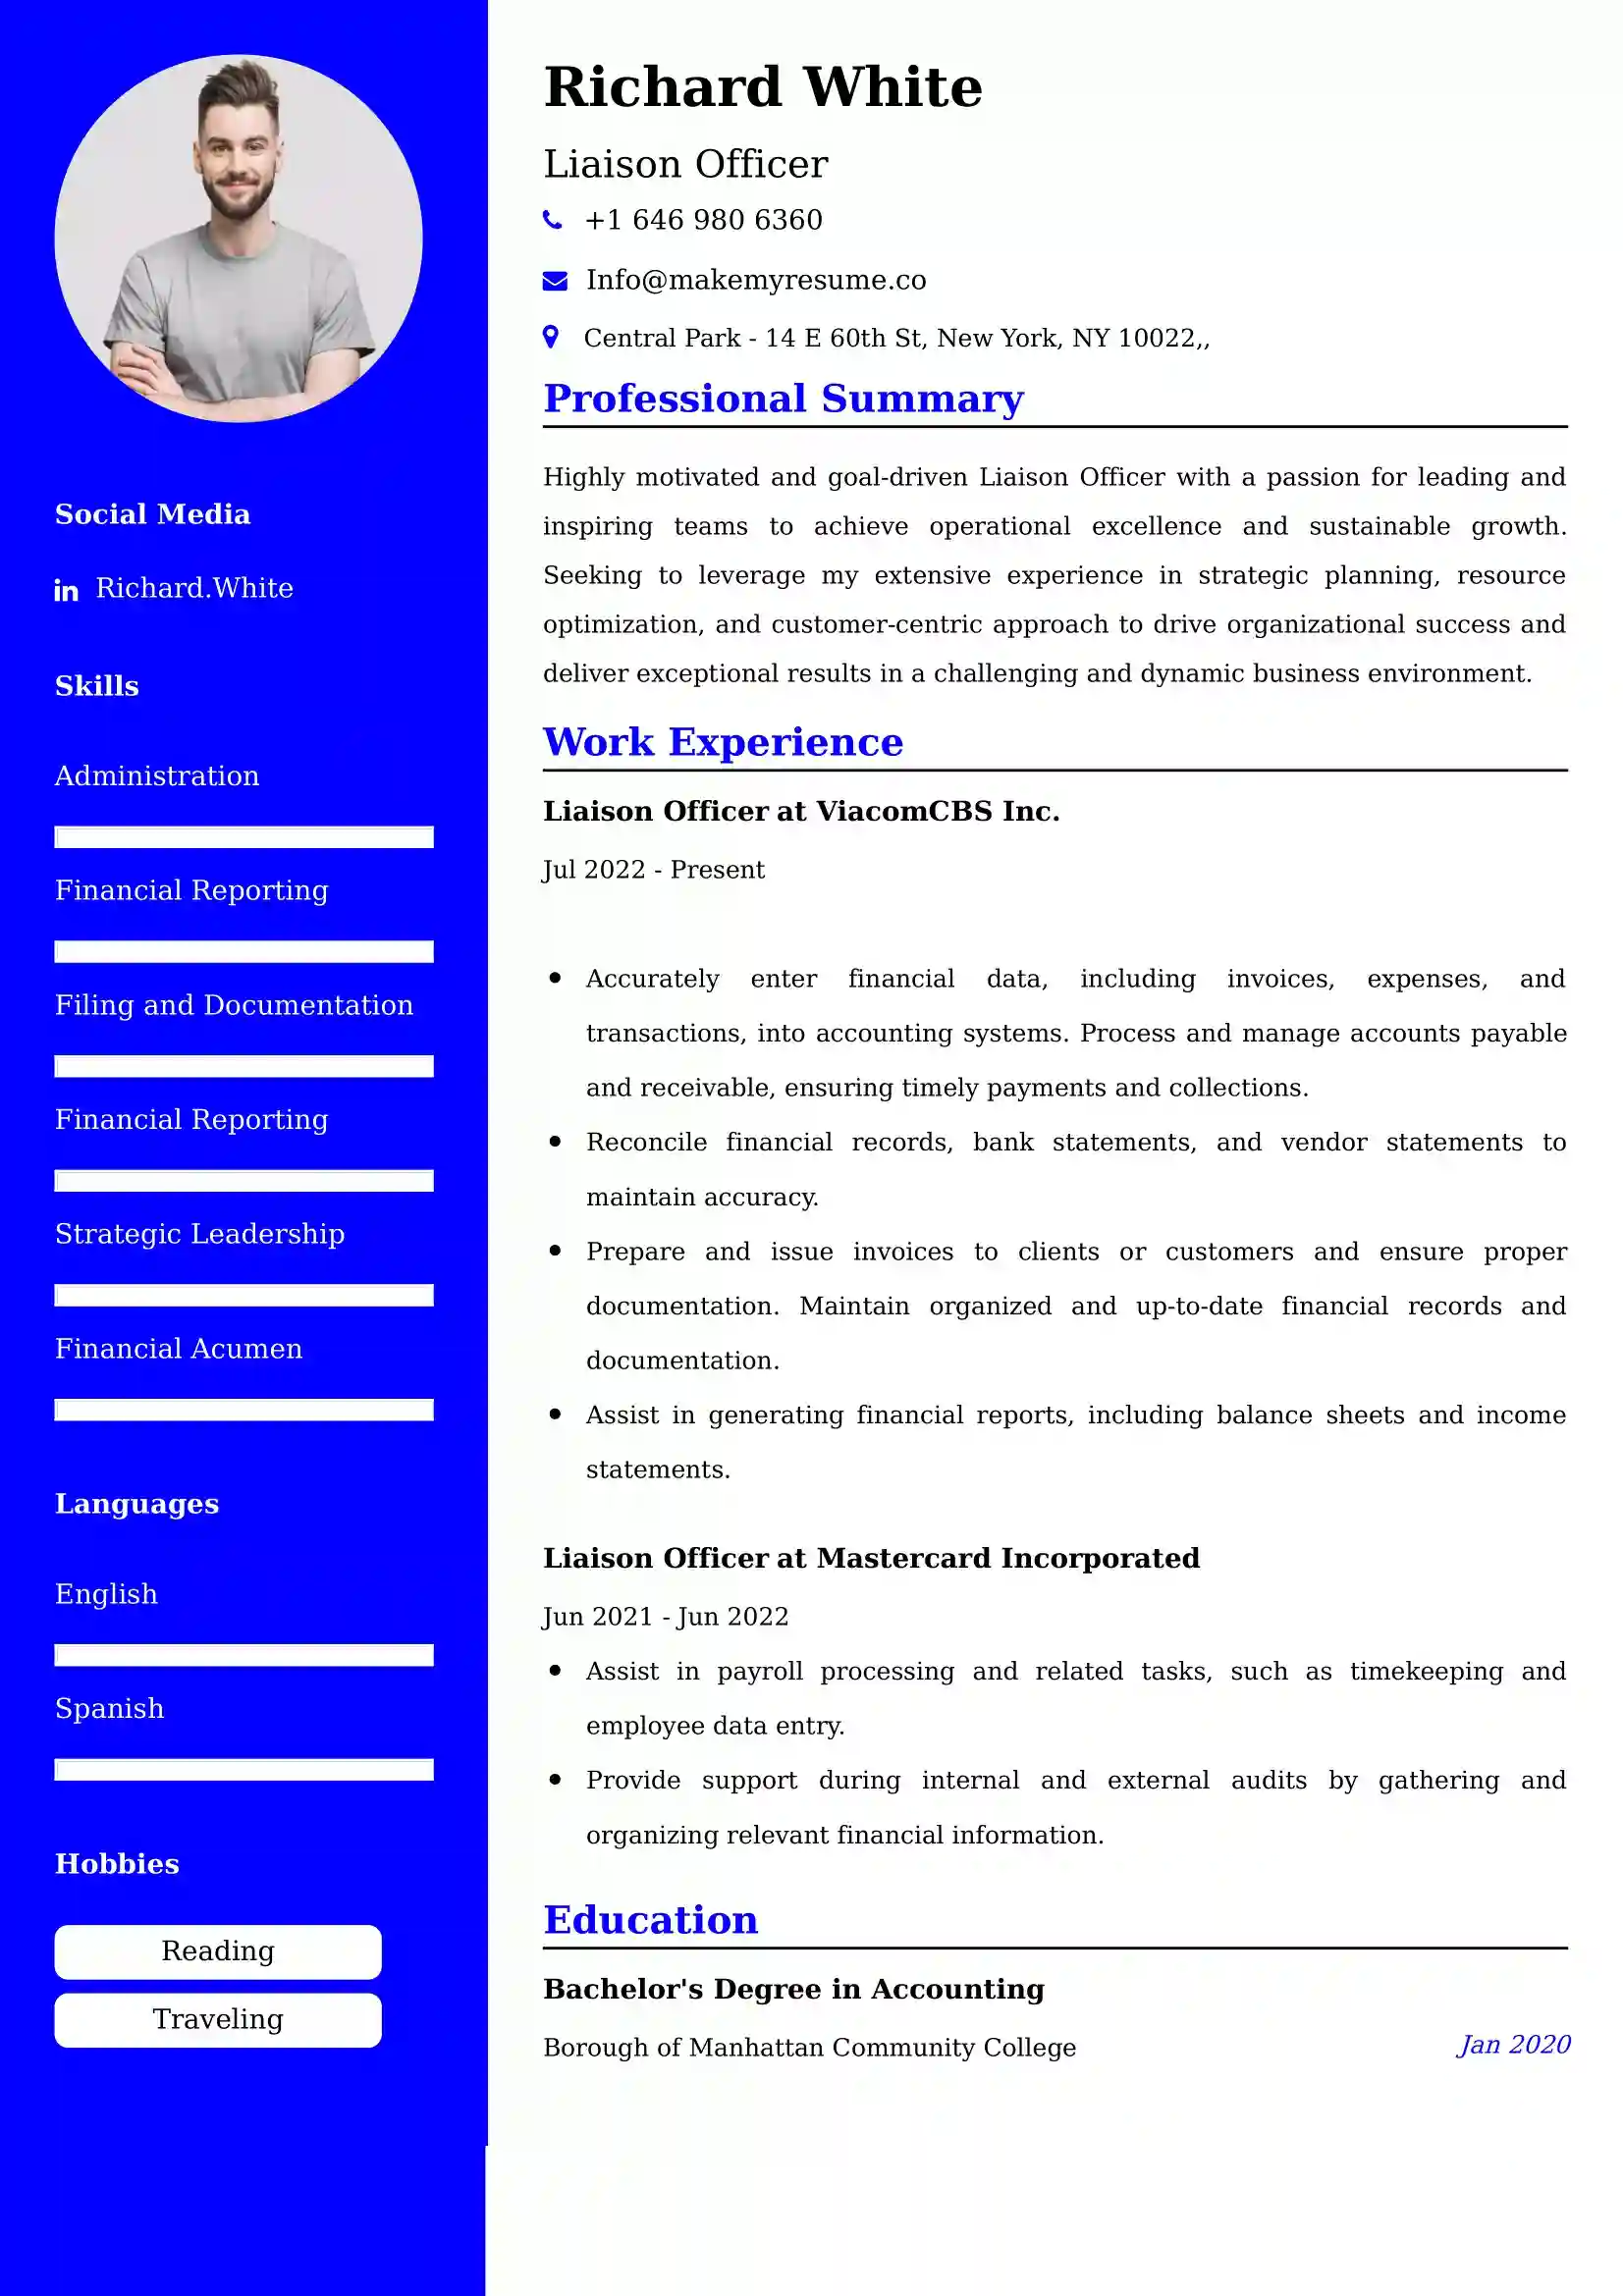 Liaison Officer Resume Examples for UK Jobs - Tips and Guide